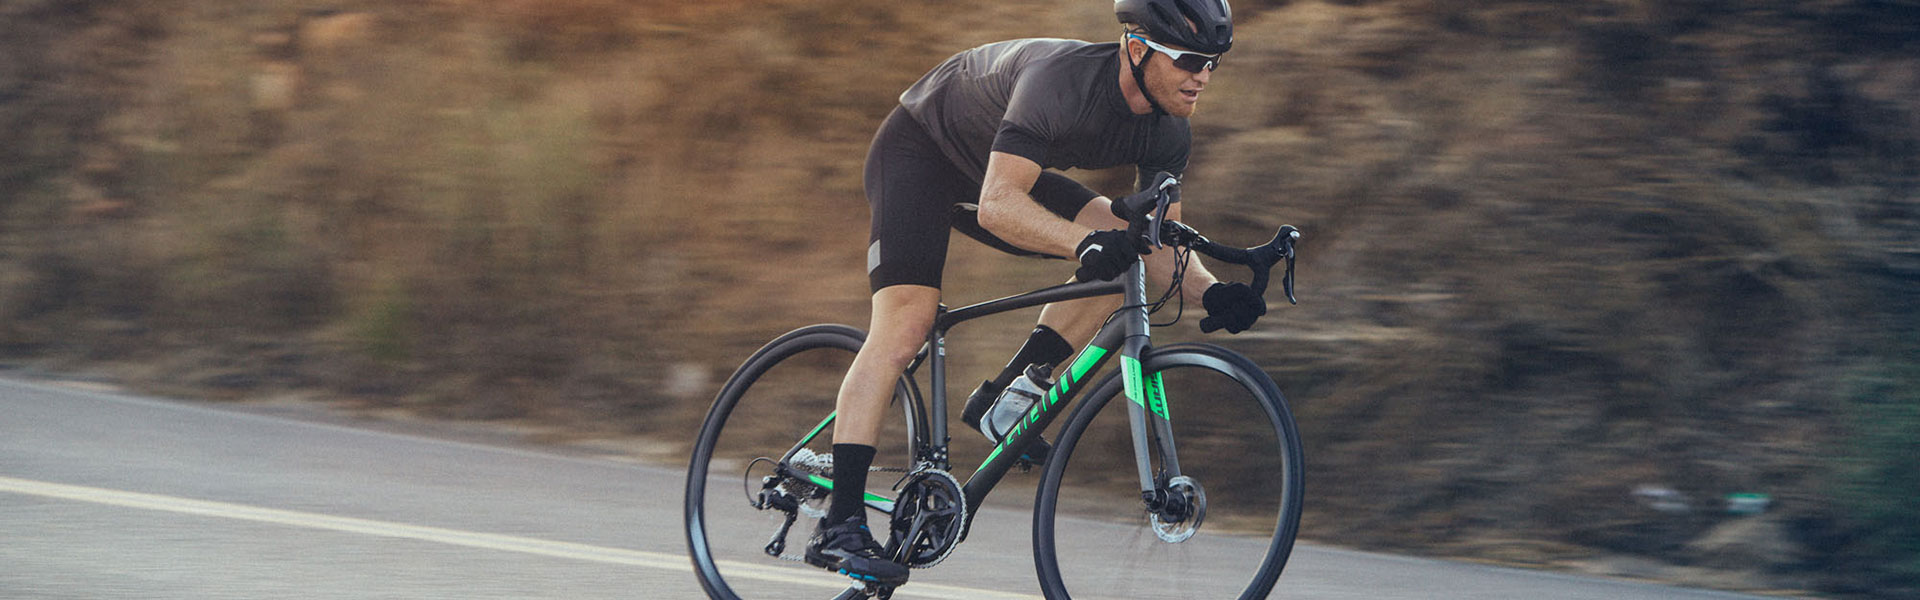 2018 Contend SL Disc | Giant Bicycles Official site